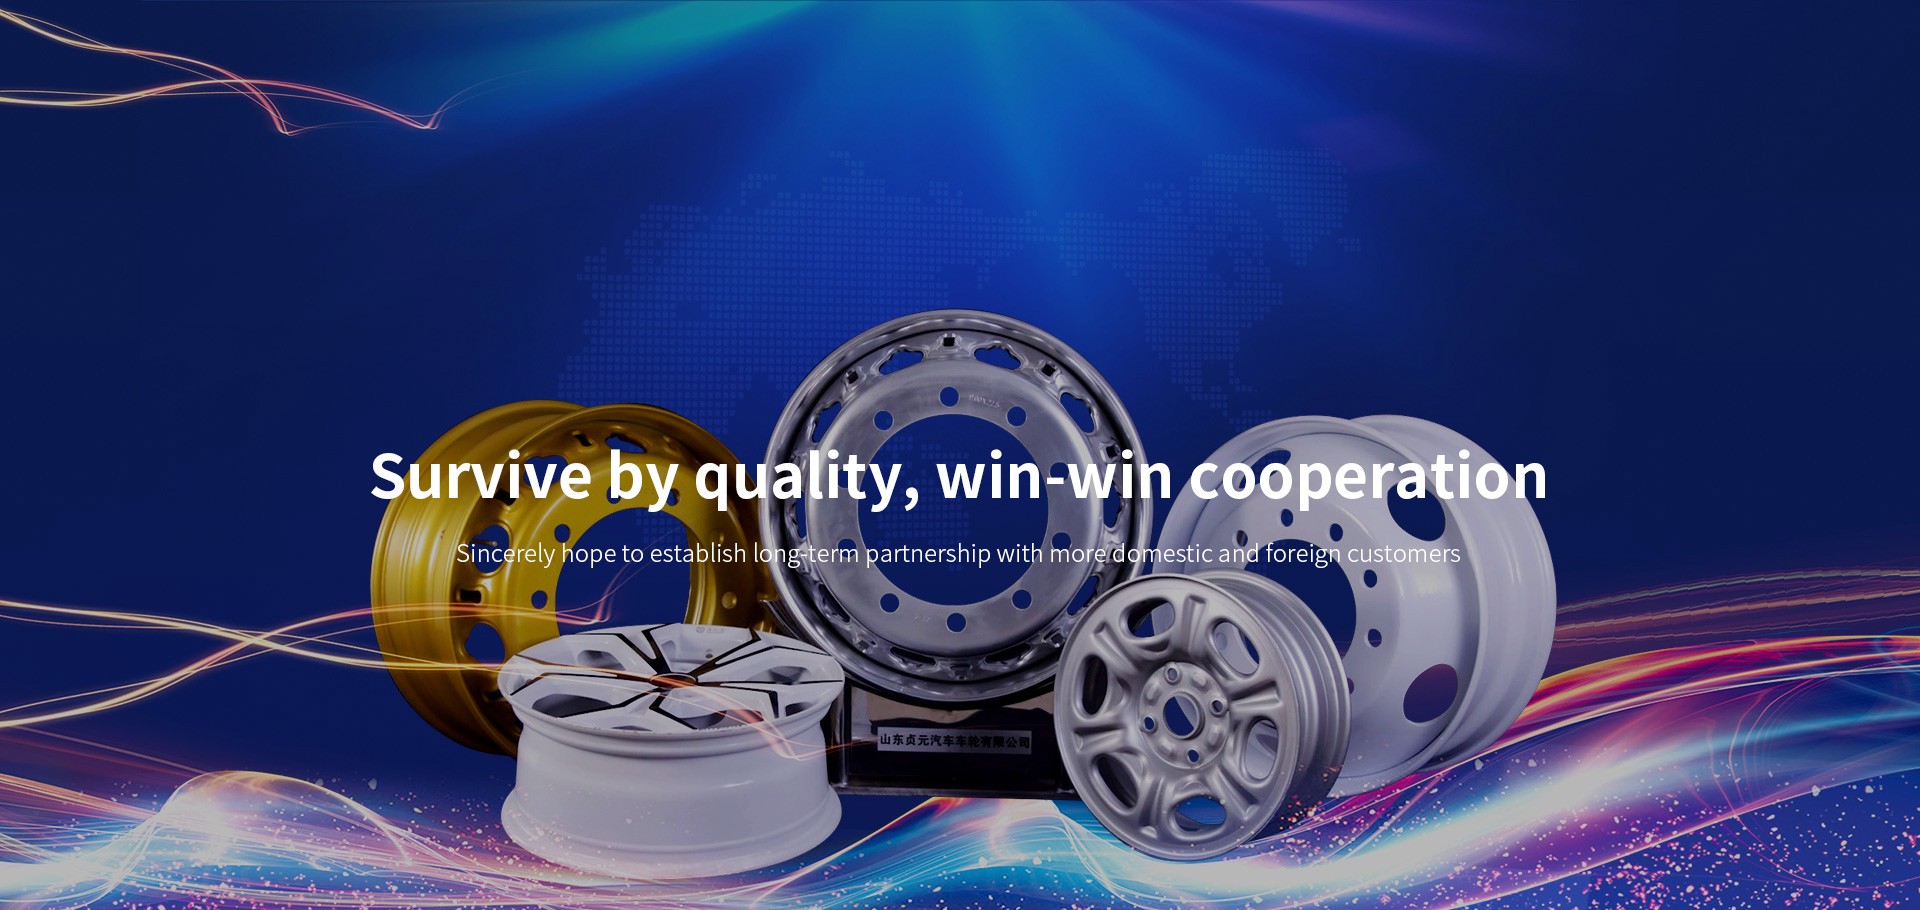 Survive by quality, win-win cooperation